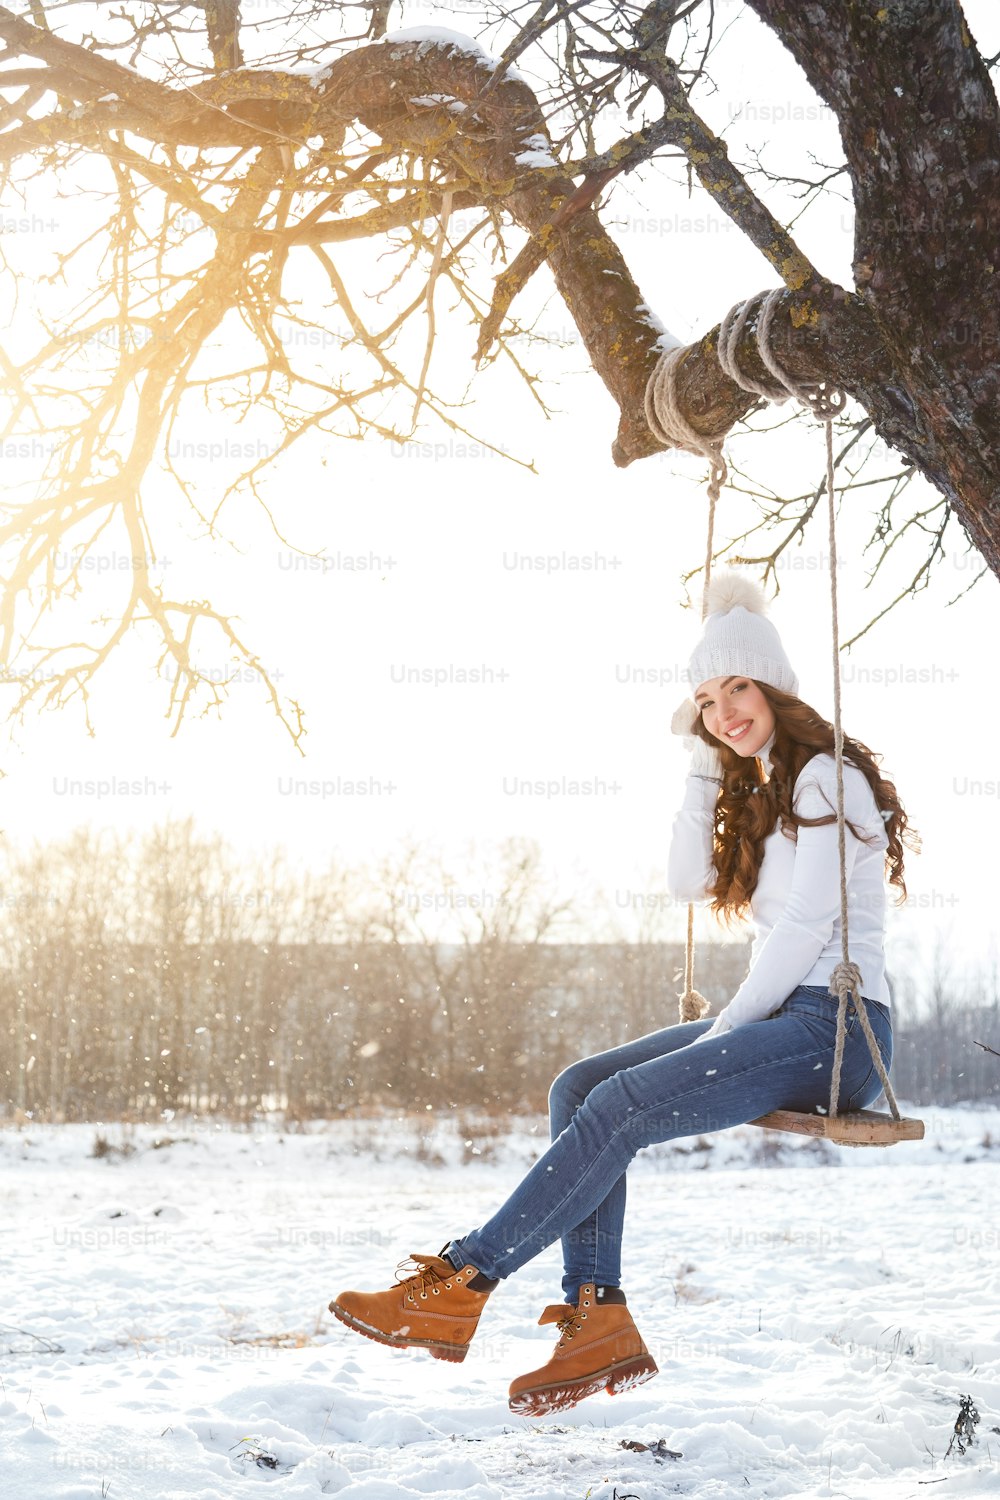 Happy girl on rope swing at sunny winter day